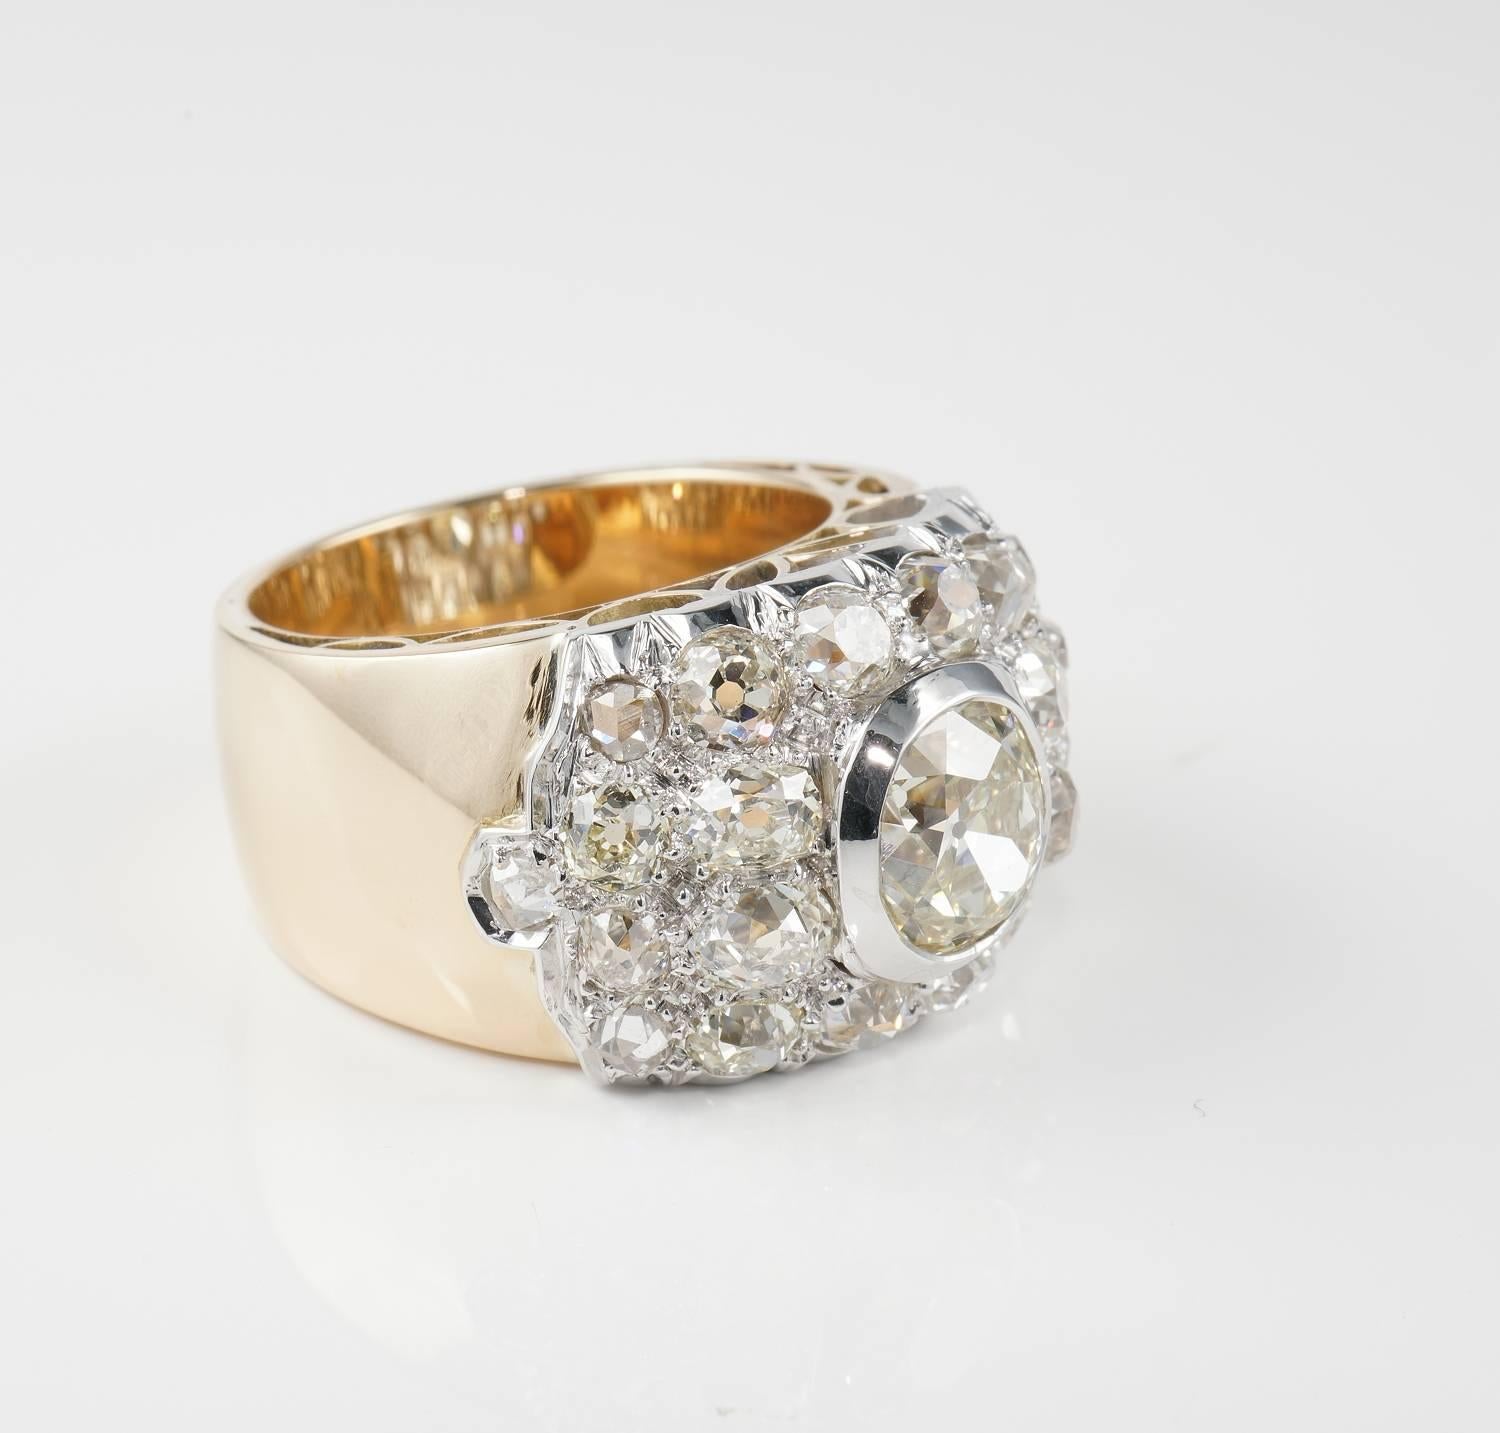 Magnificent authentic Art Deco example richly set with Diamonds, exquisitely crafted of solid Platinum and 18KT rose gold -not marked
Striking net design slightly bombe centring a large oval Cushion old mine cut Diamond of 2.06 Ct rated J/K VVS